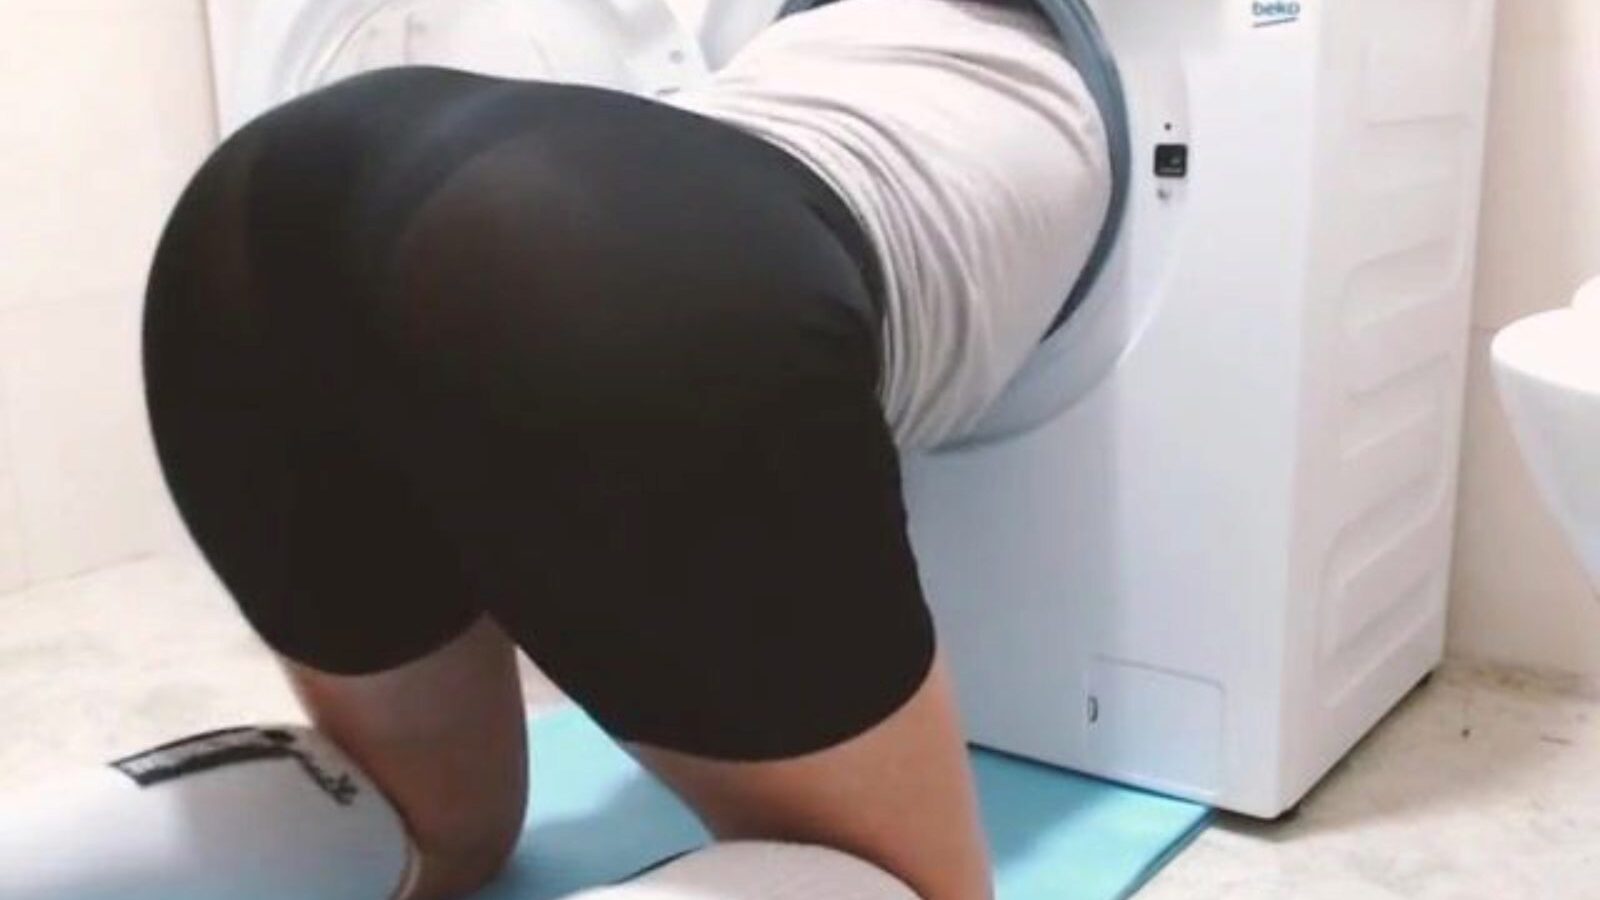 Stepsister got Stuck in the Washing Machine Homemade... | xHamster Watch Stepsister got Stuck in the Washing Machine Homemade Video episode on xHamster - the ultimate archive of free-for-all Glory Hole & MILF porn tube vids